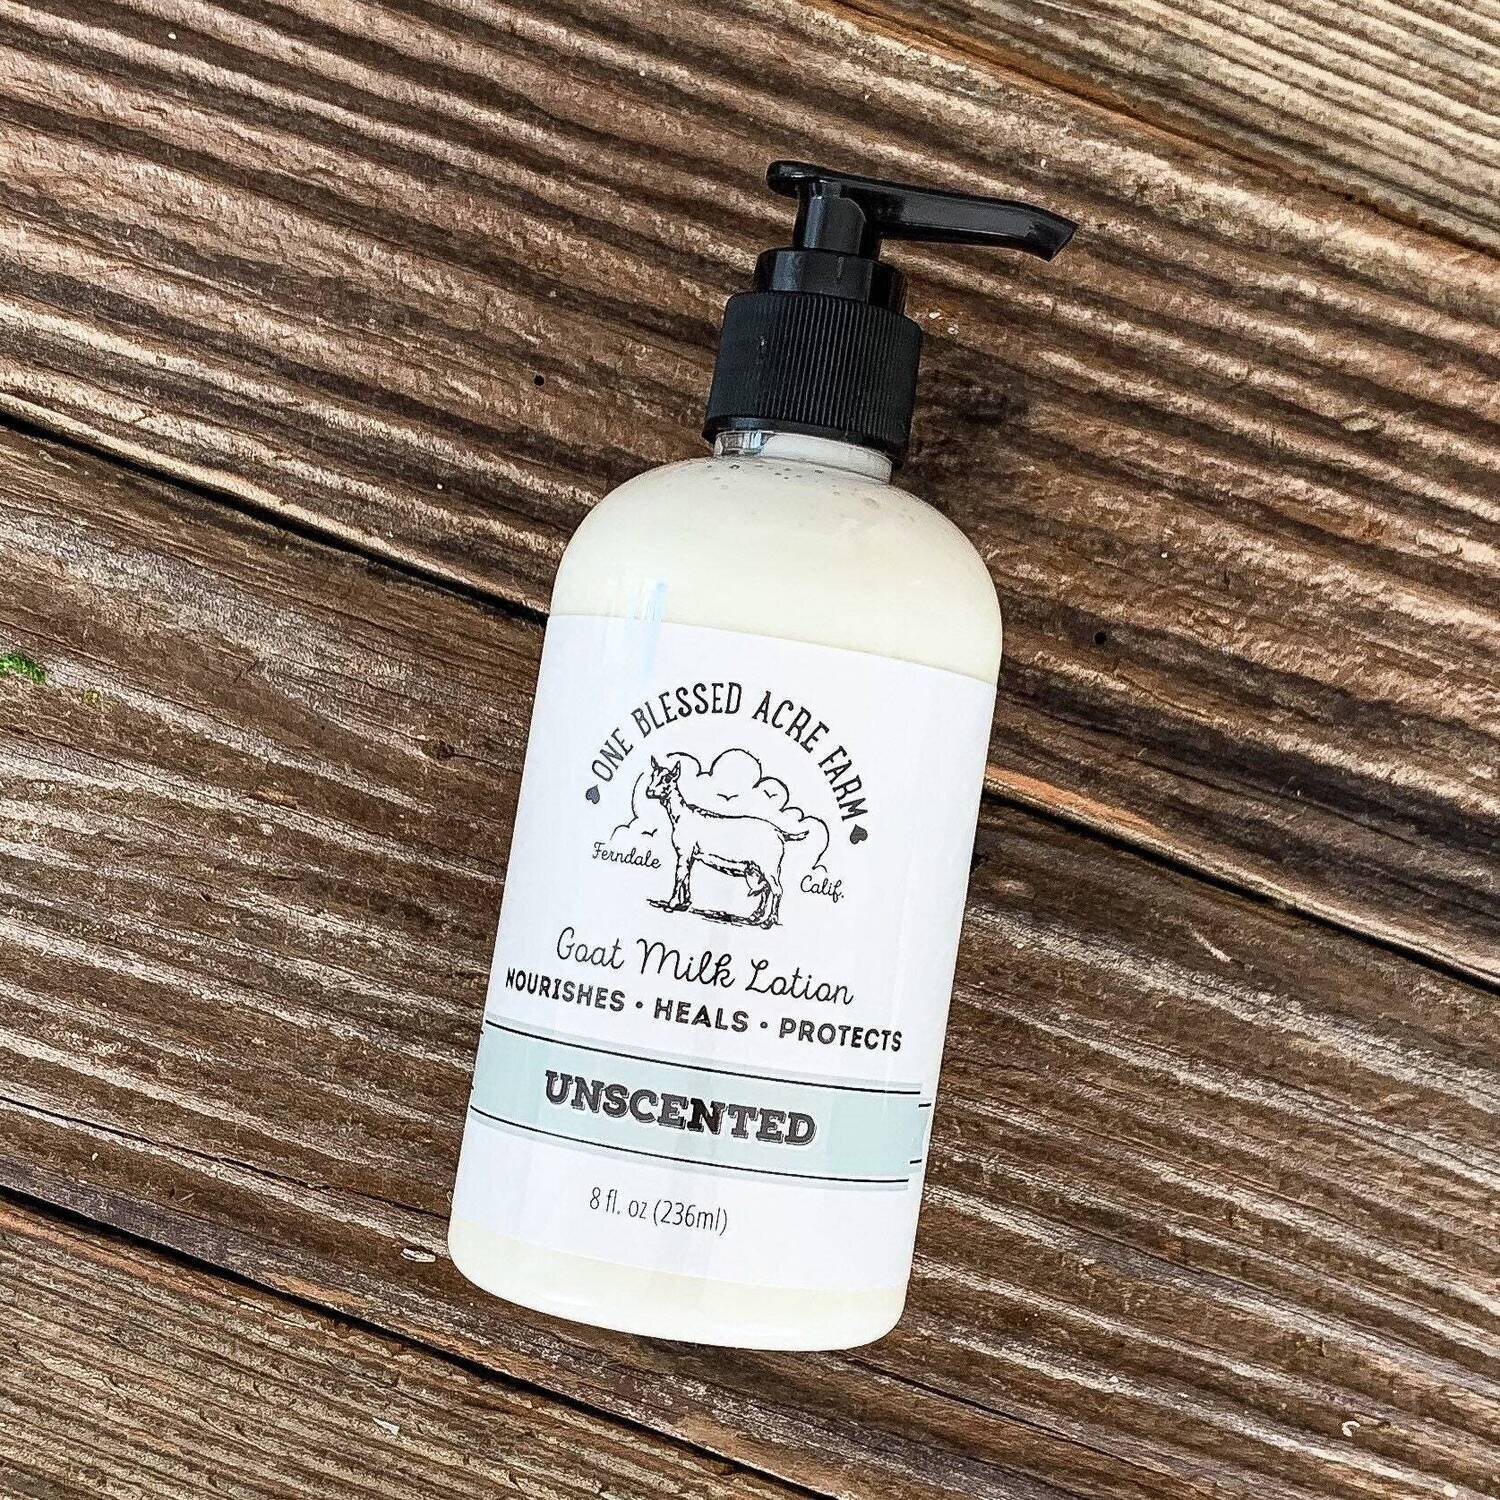 Unscented Goat Milk Lotion for Hand and Body, Natural, Nourishing, Moisturizing, Handmade, Alpha-Hydroxy Acids, Eczema, Dry Skin Relief